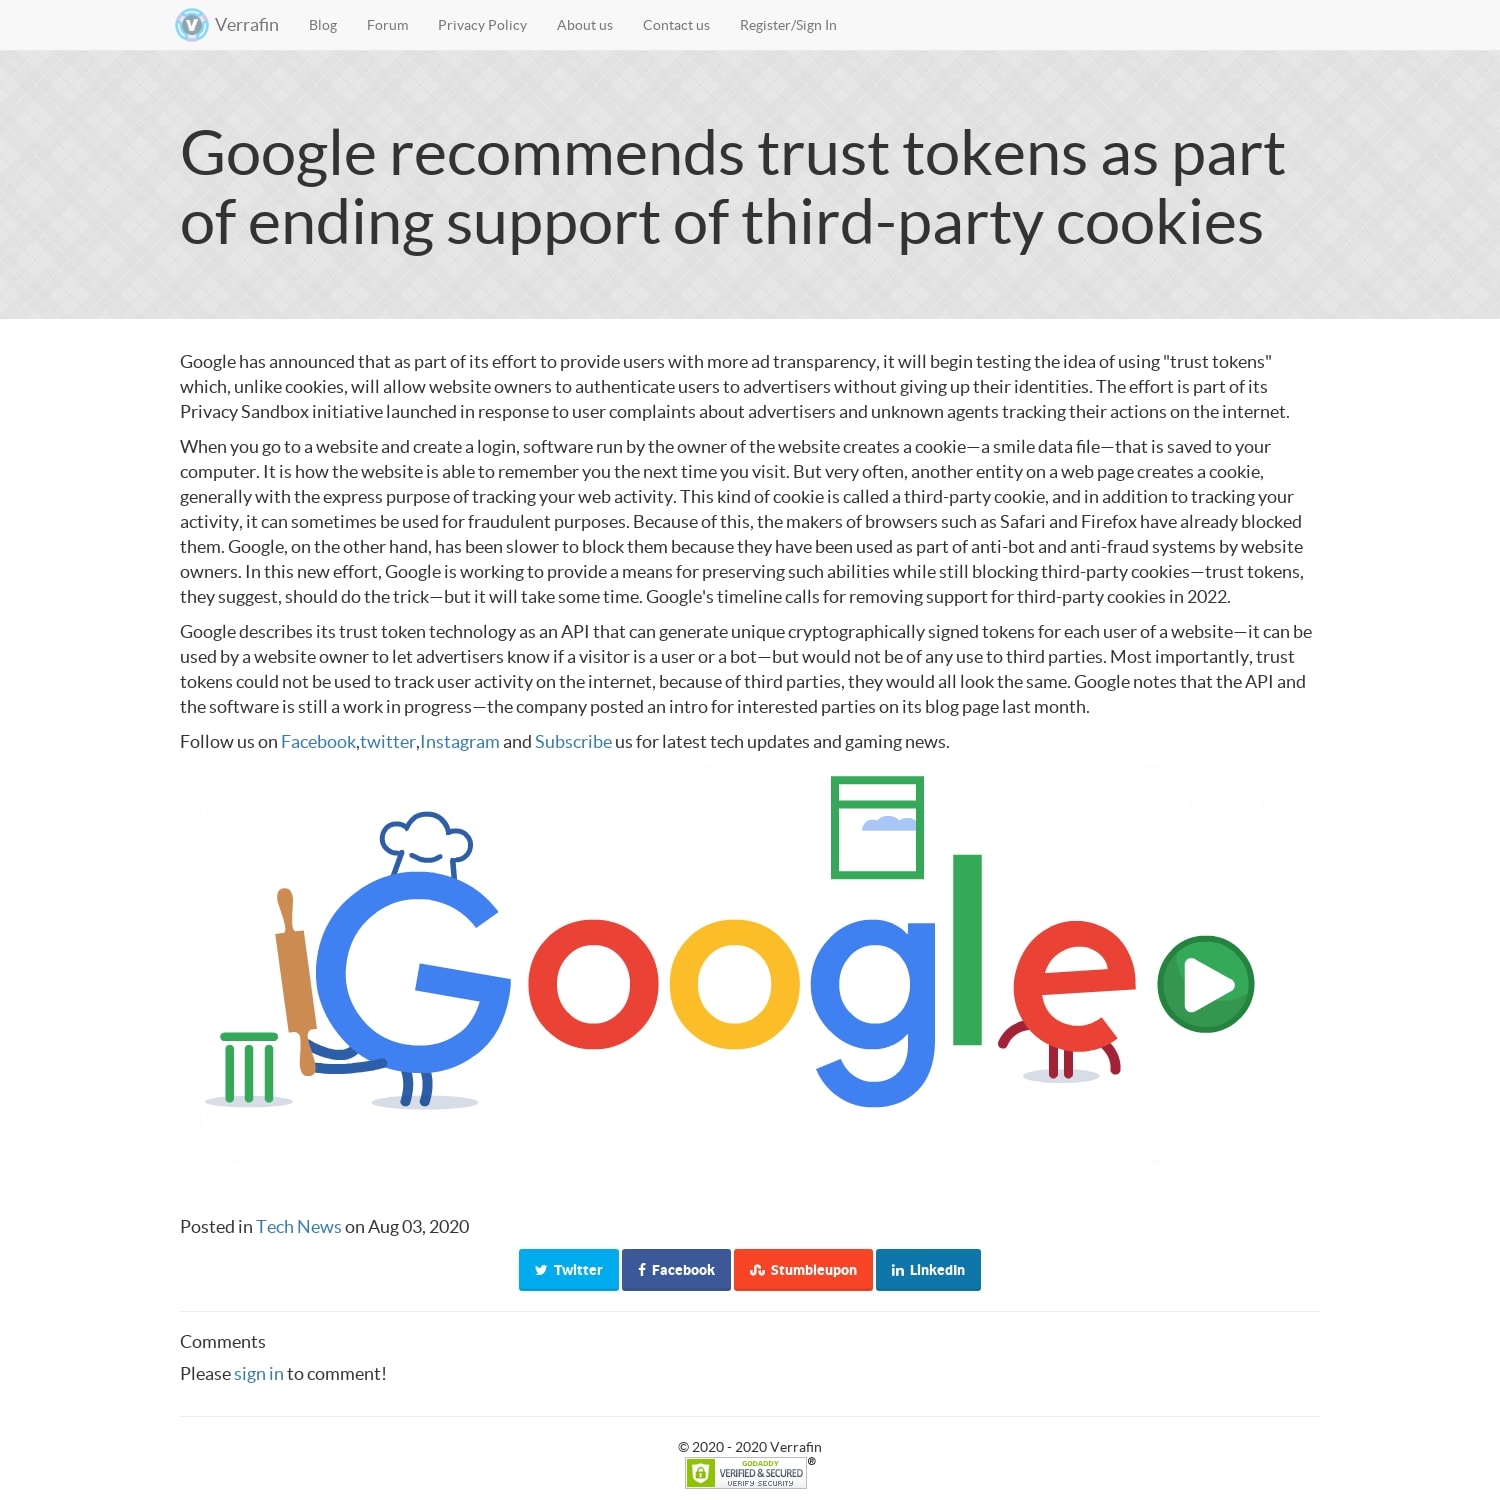 Google recommends trust tokens as part of ending support of third-party cookies